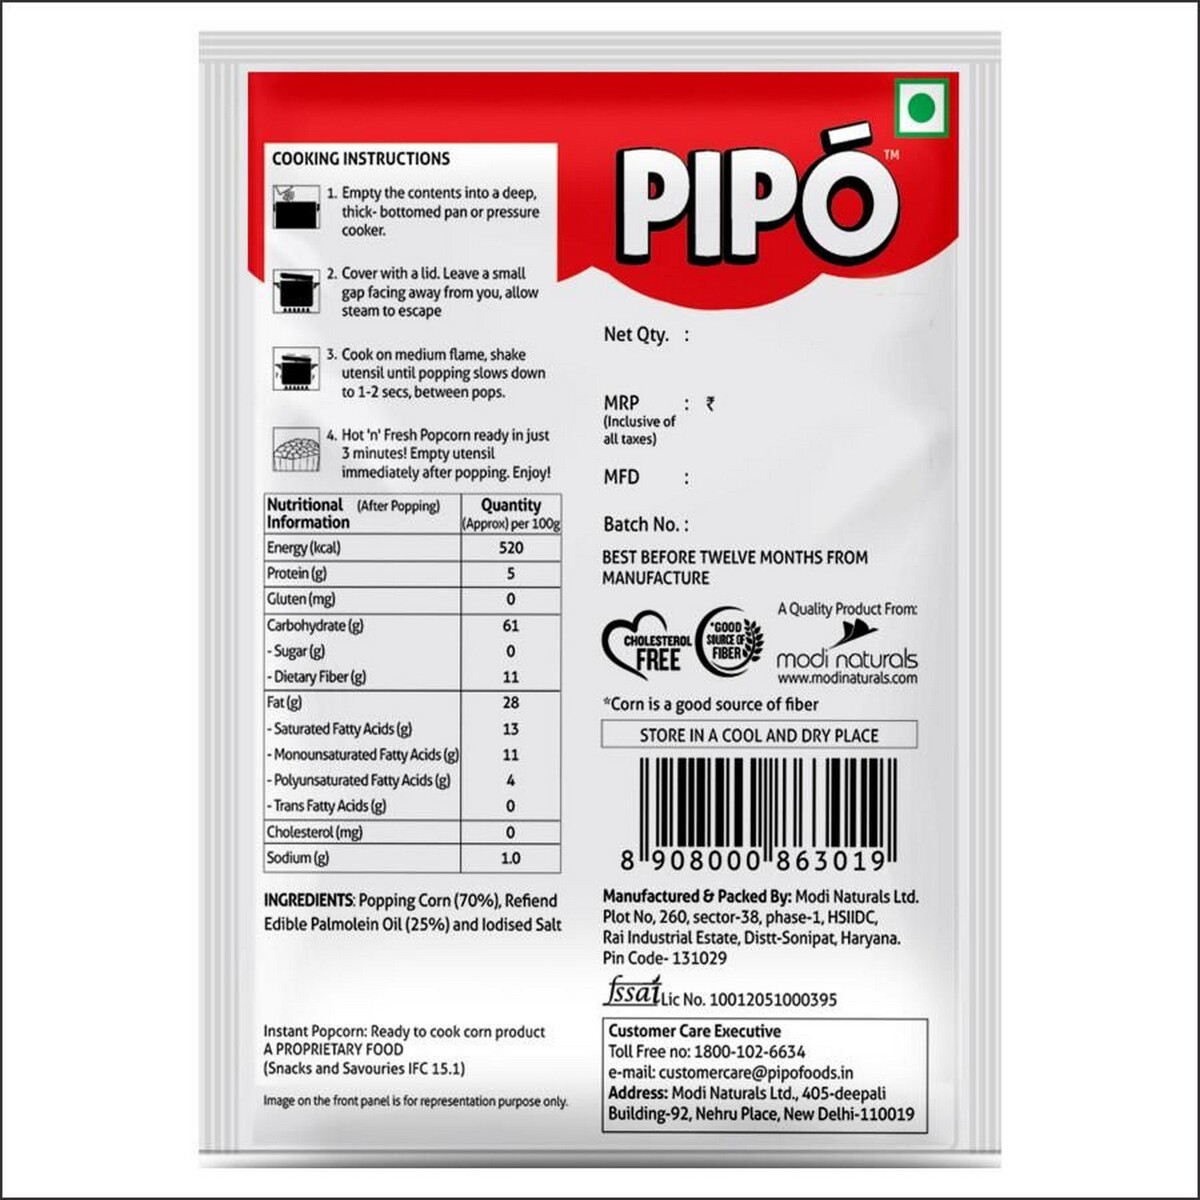 Pipo Classic Salted 40gm